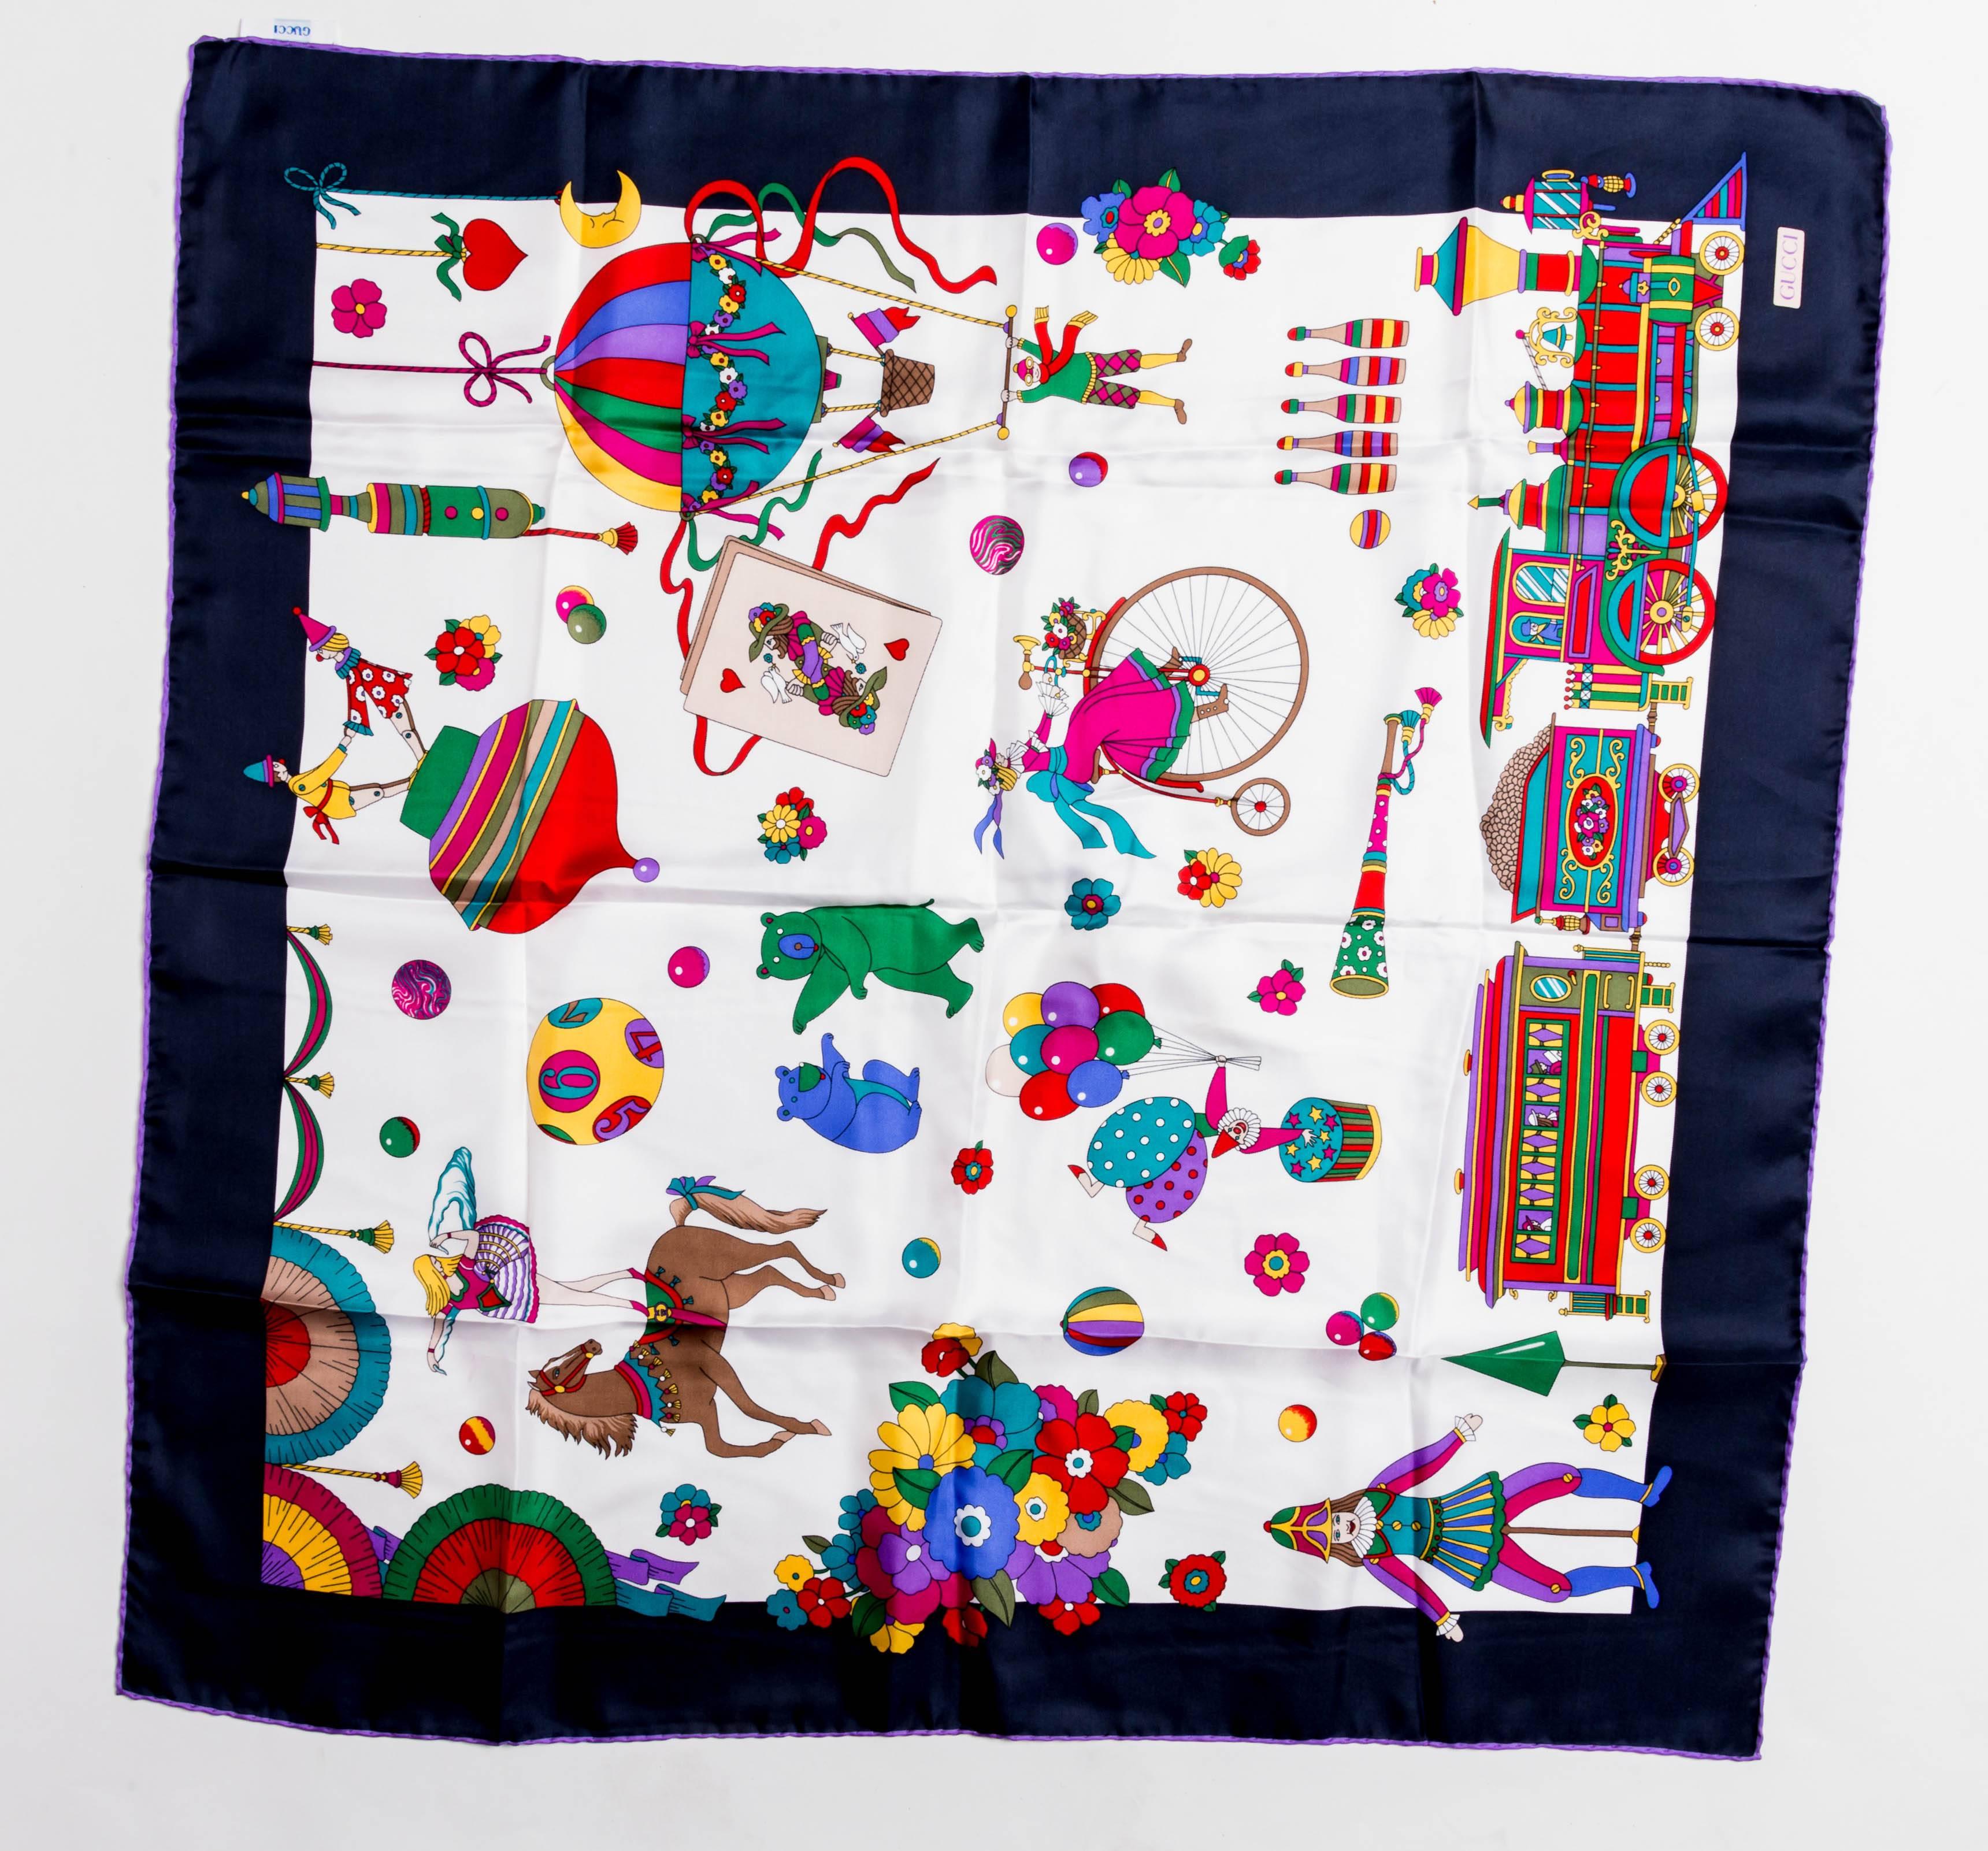 Vintage Gucci Circus Collection Scarf from the late 20th Century.
Features a navy blue border with whimsical bears, clowns and acrobats throughout. 
There is a small pink mark (lipstick?) to this otherwise impeccable silk scarf.